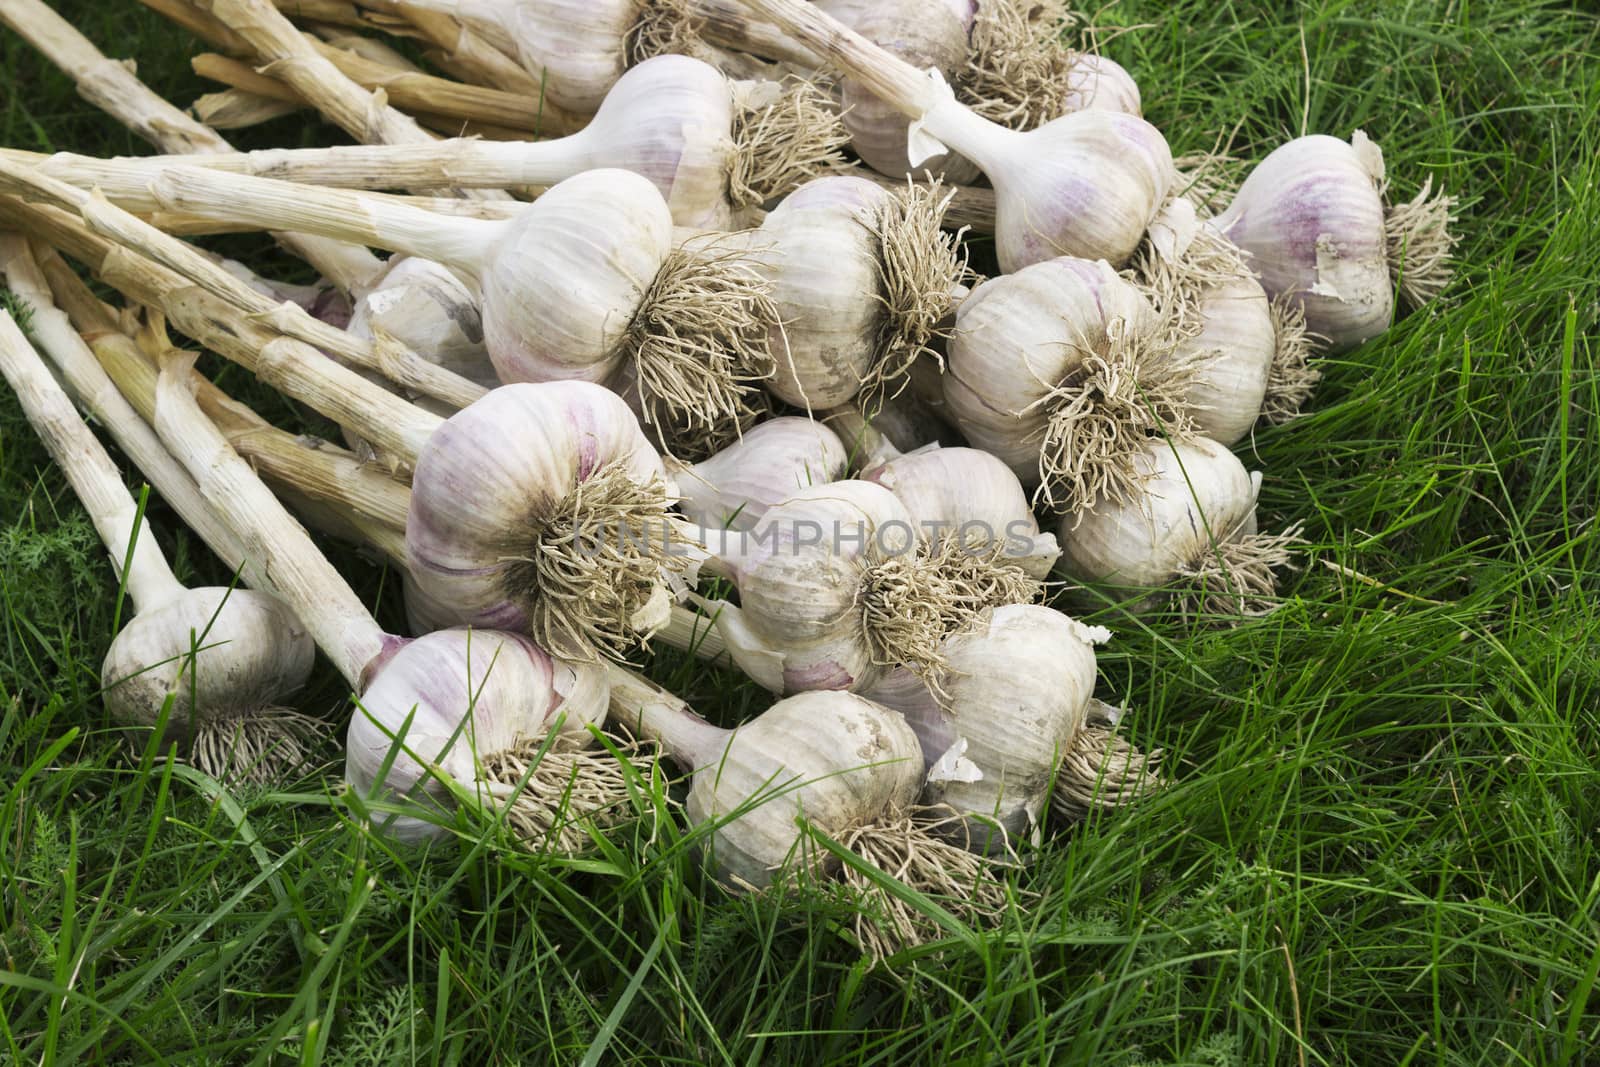 A pile of ripe garlic on the lawn